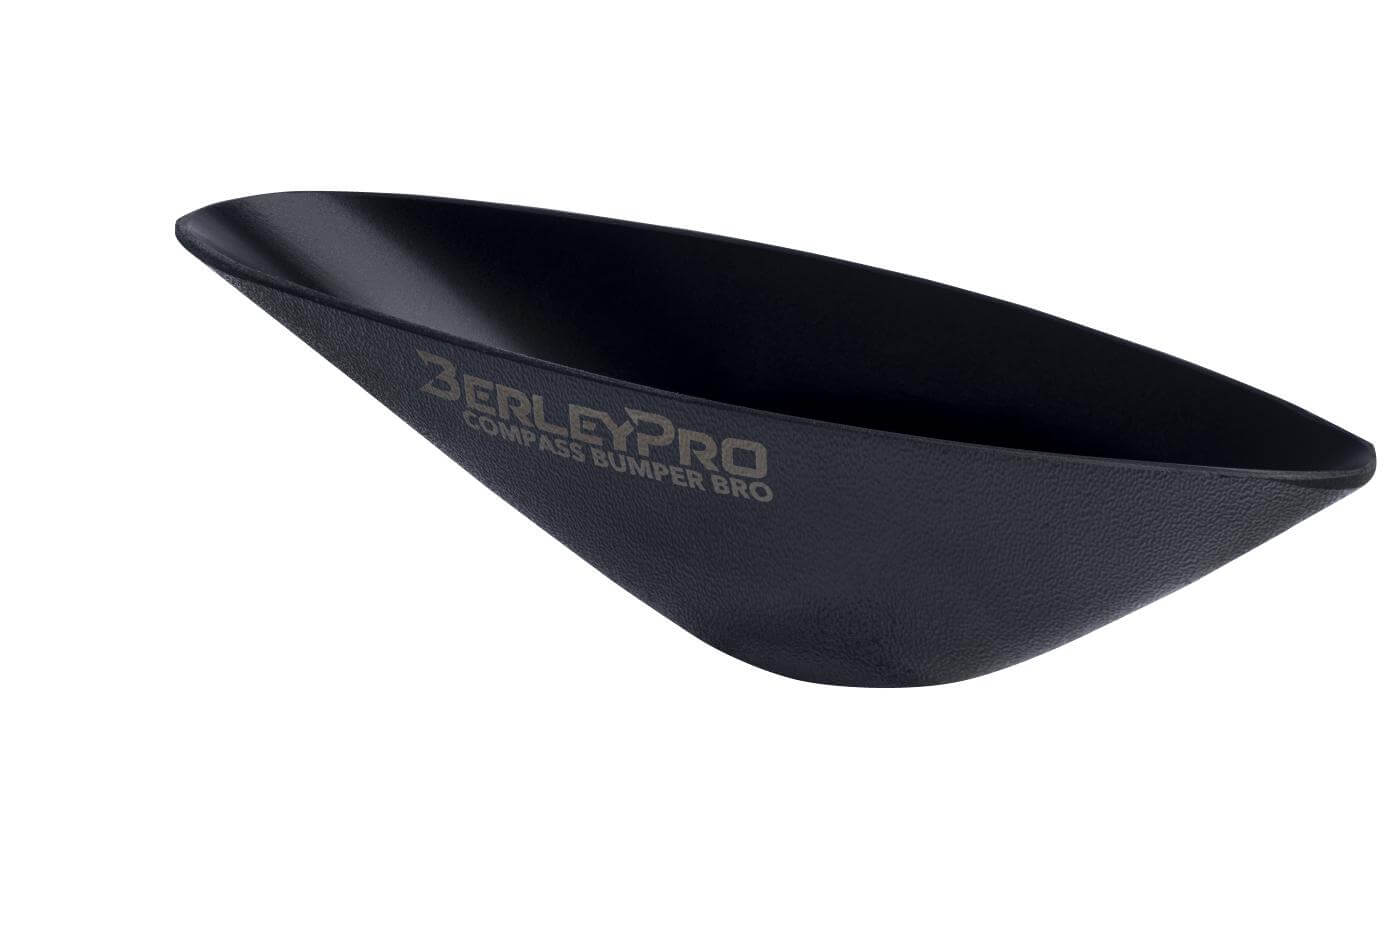 BerleyPro Bumper Bro Kayak Keel Guard for the Hobie Compass Single and Duo sku: